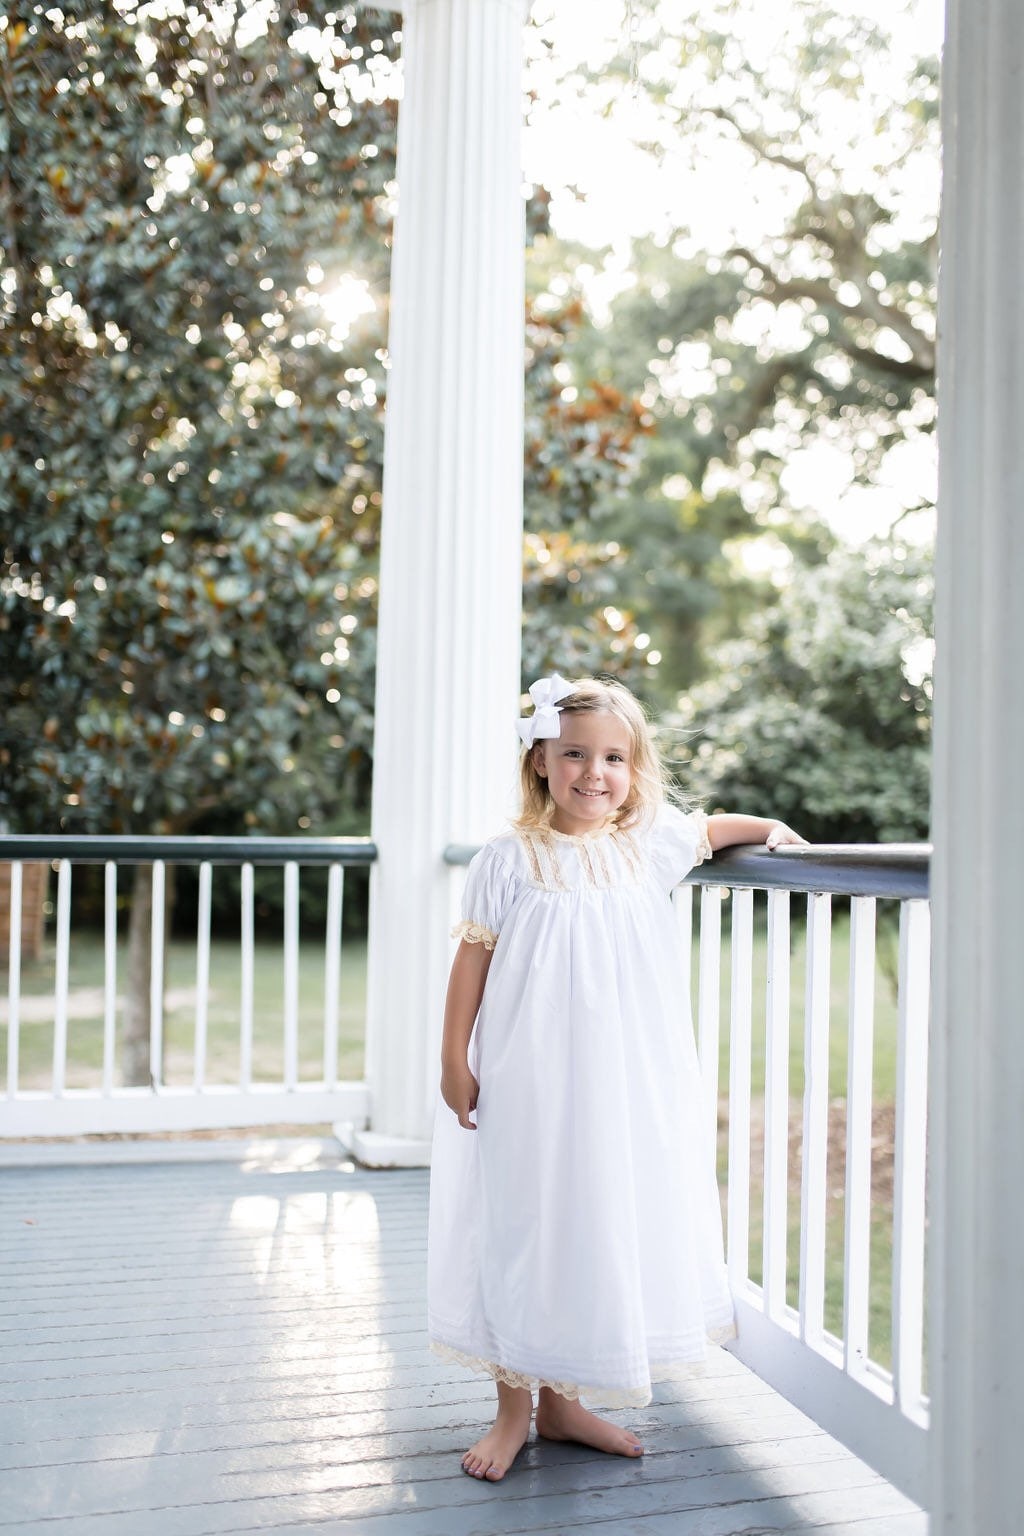 Floral Lace Heirloom Dress in White